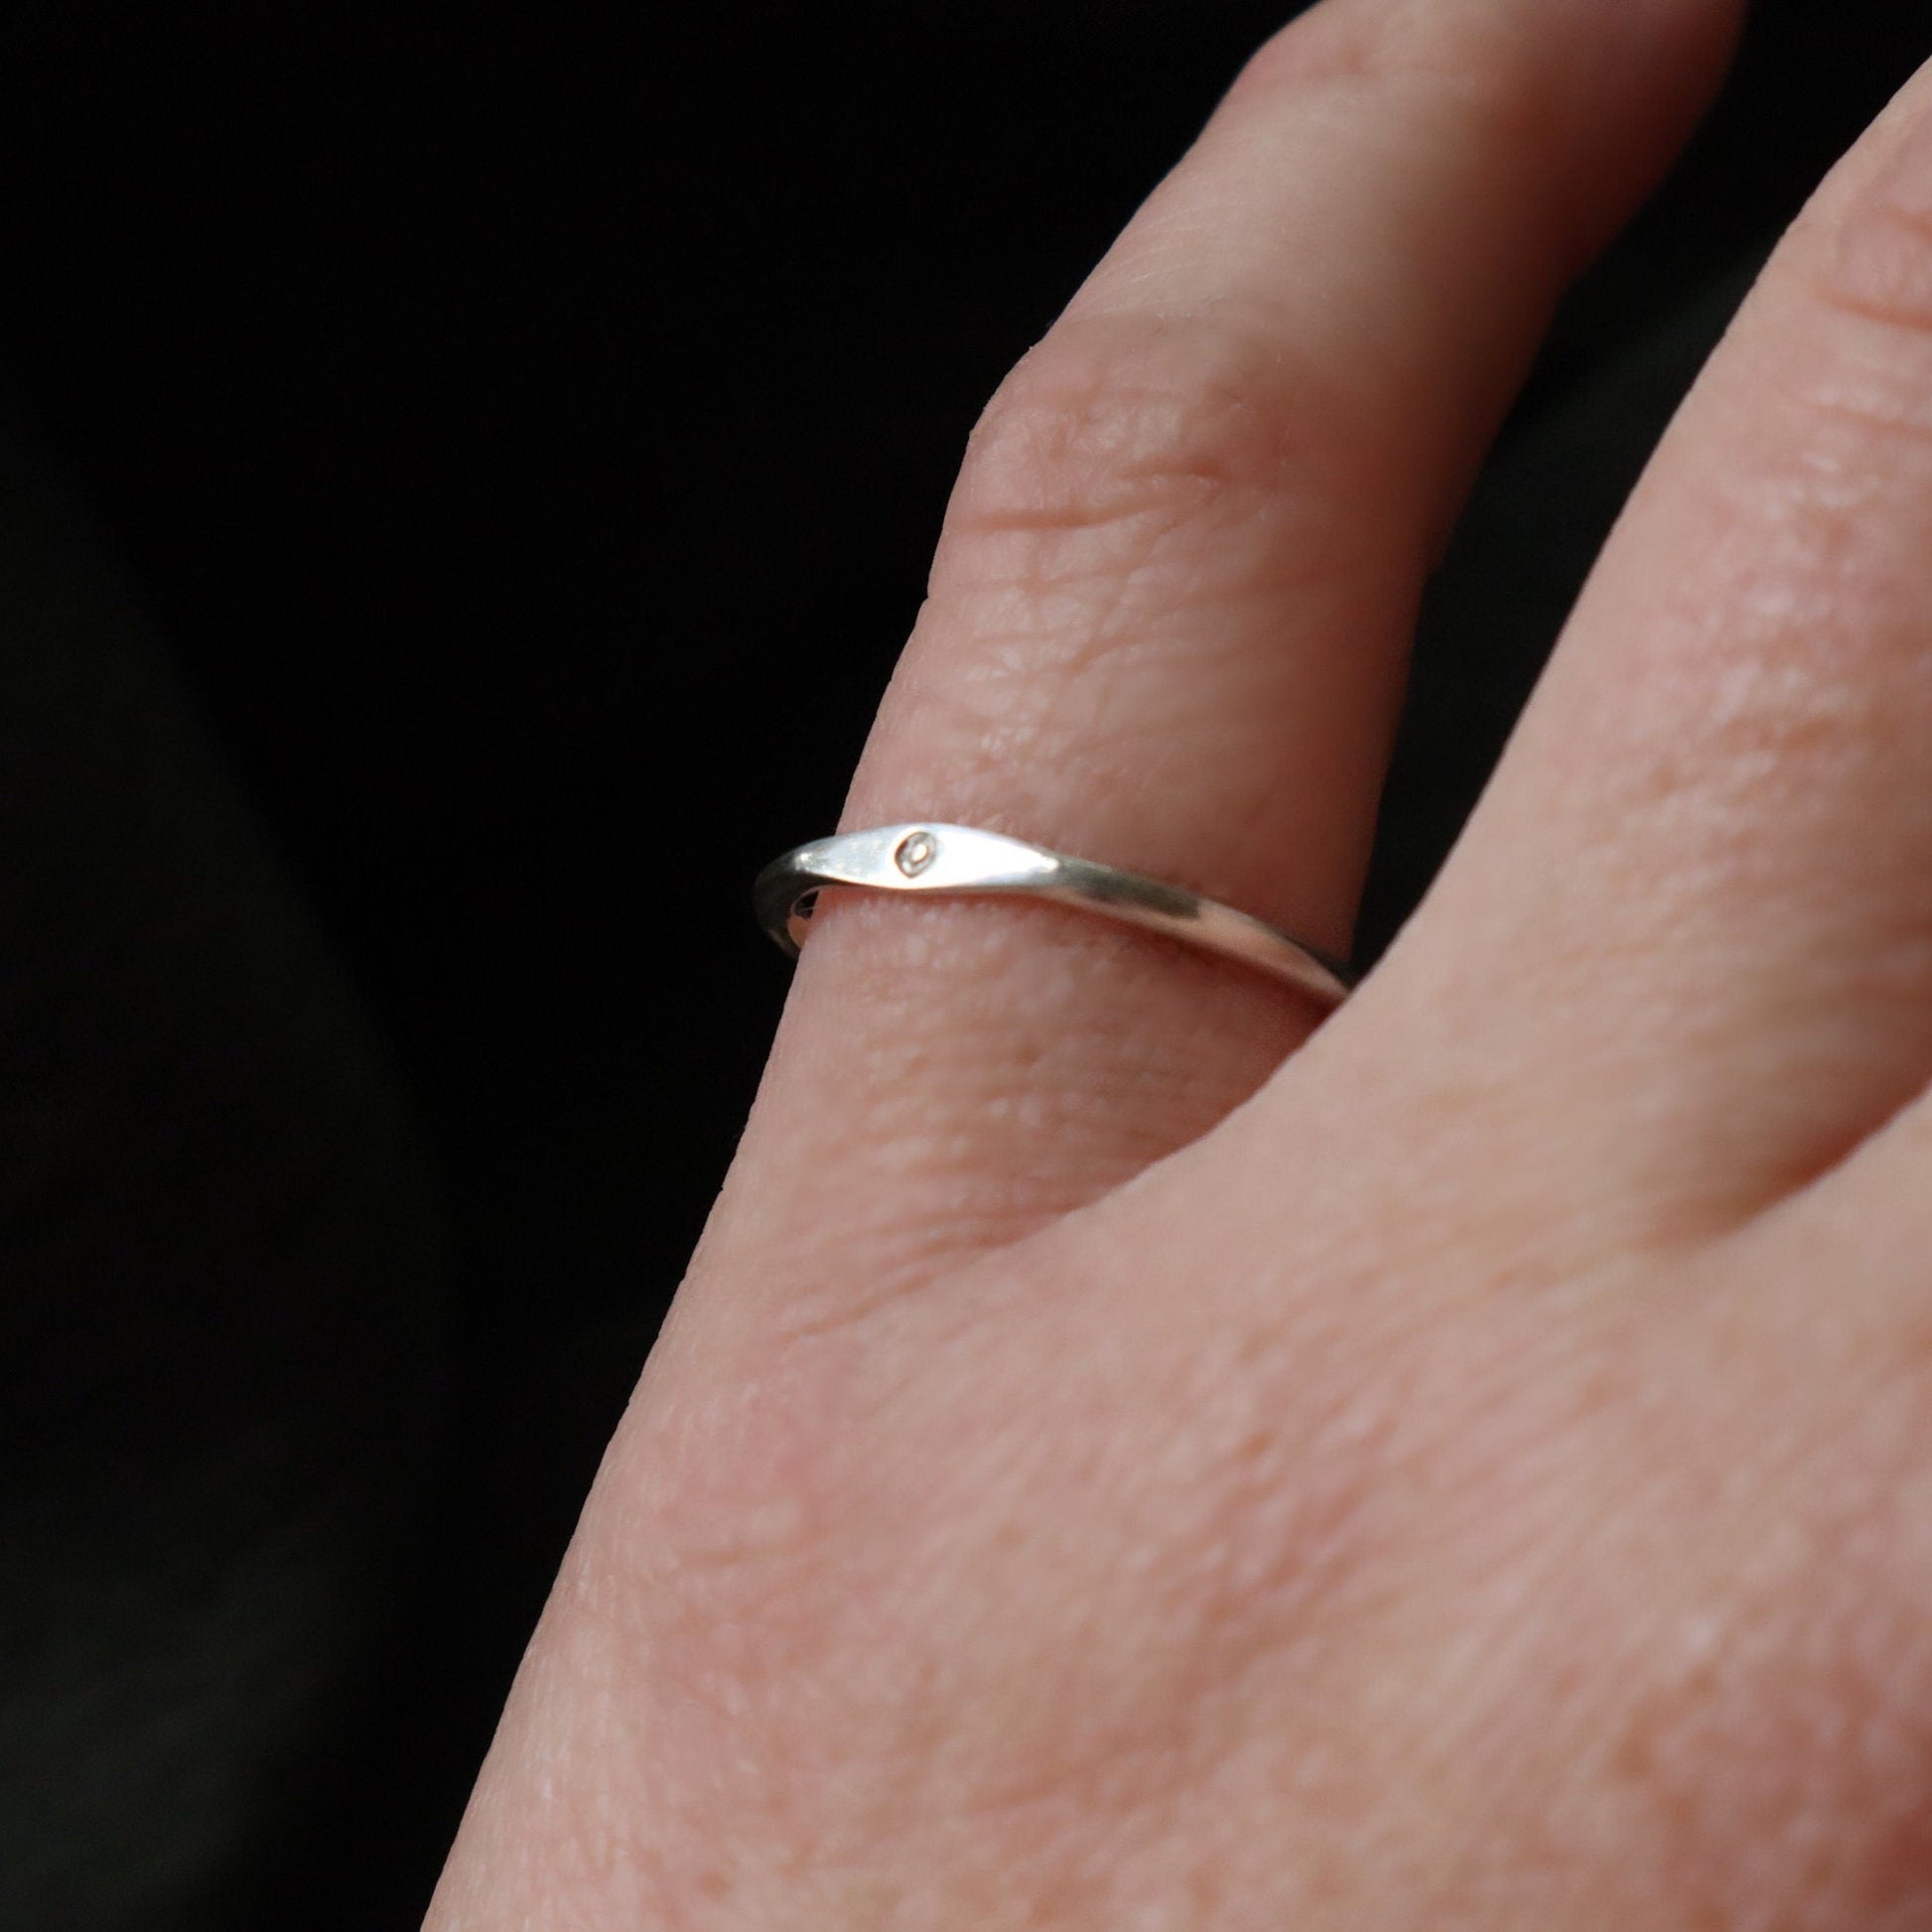 An initial ring worn on the pinky finger